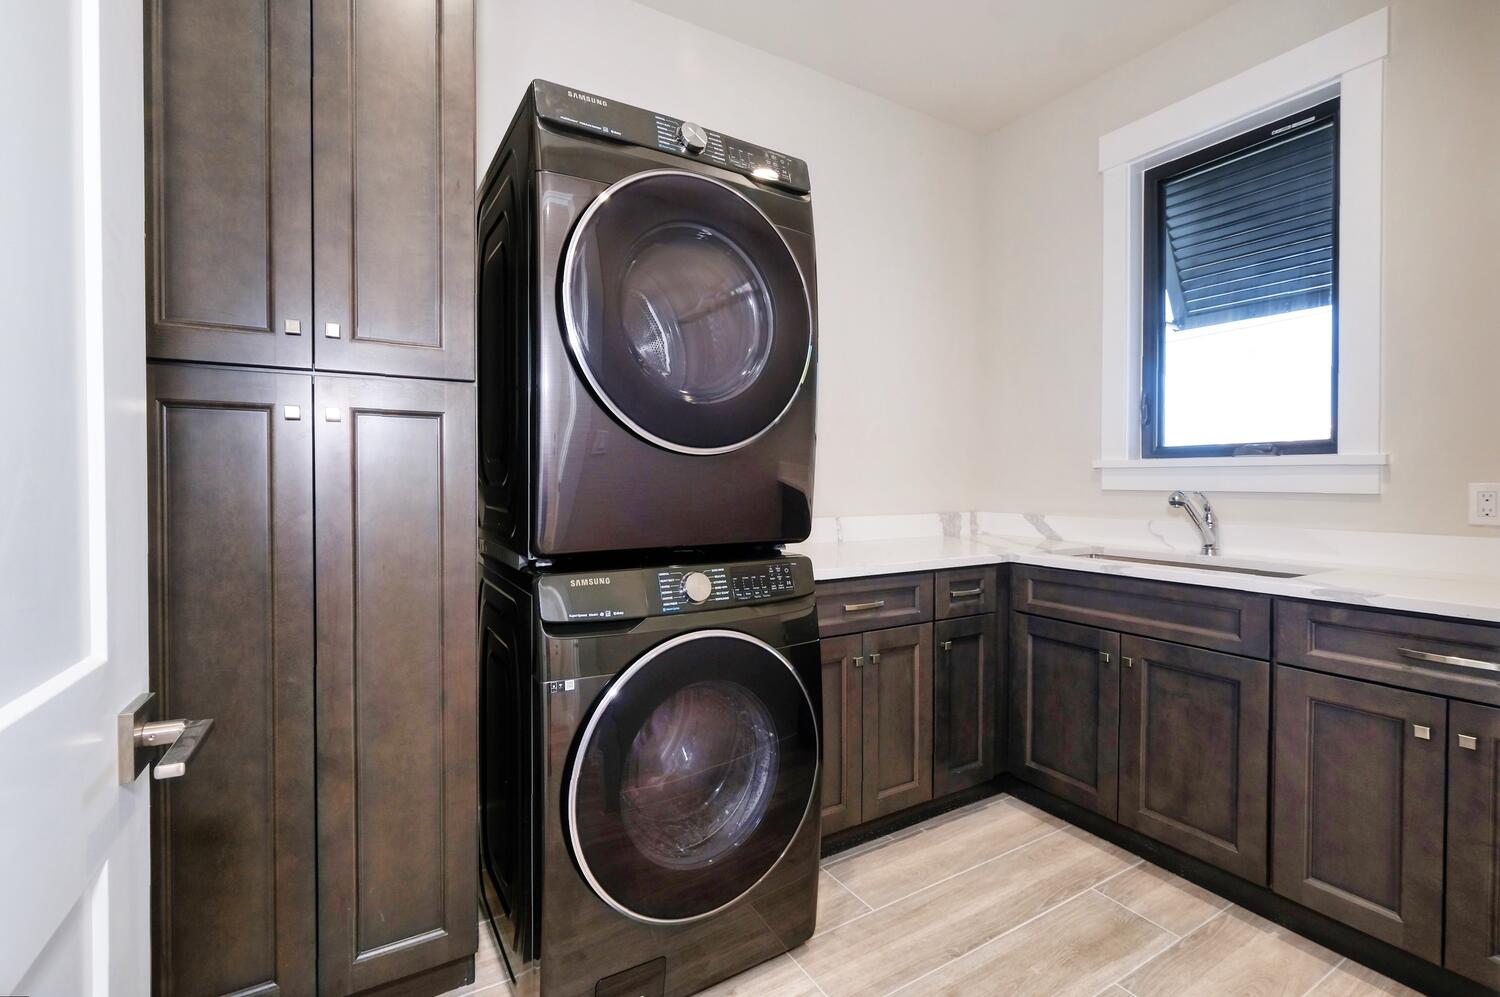 Picture of the laundry room of the model home Serenity